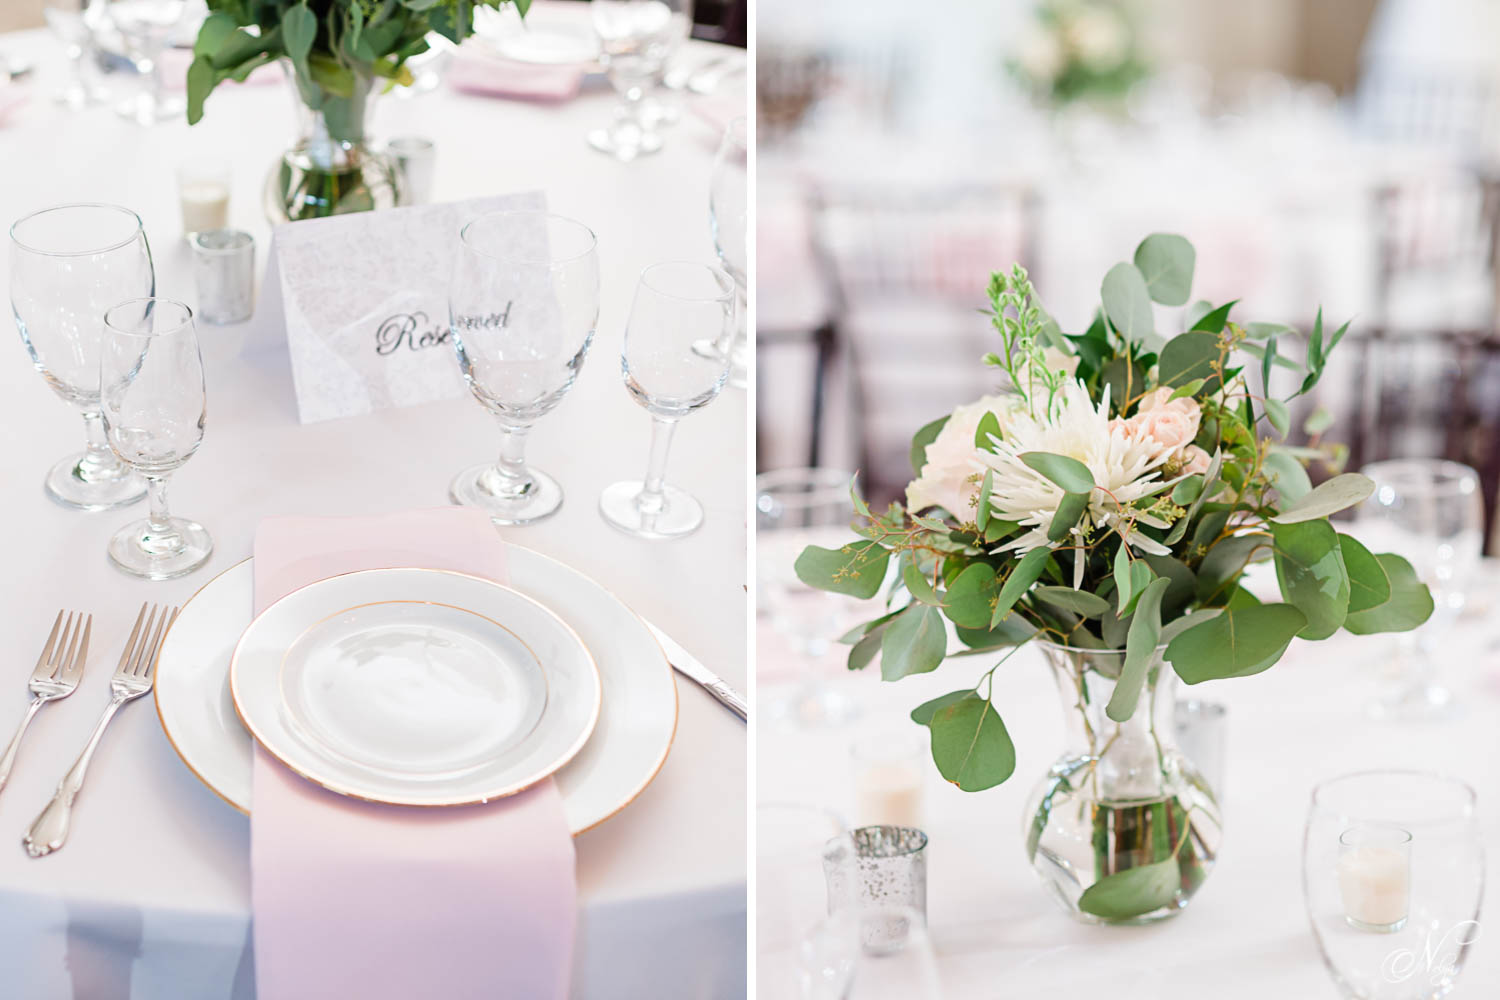 golld rimmed plates with light pink napkin place setting by Lilly Lou event rentals in Chattanooga